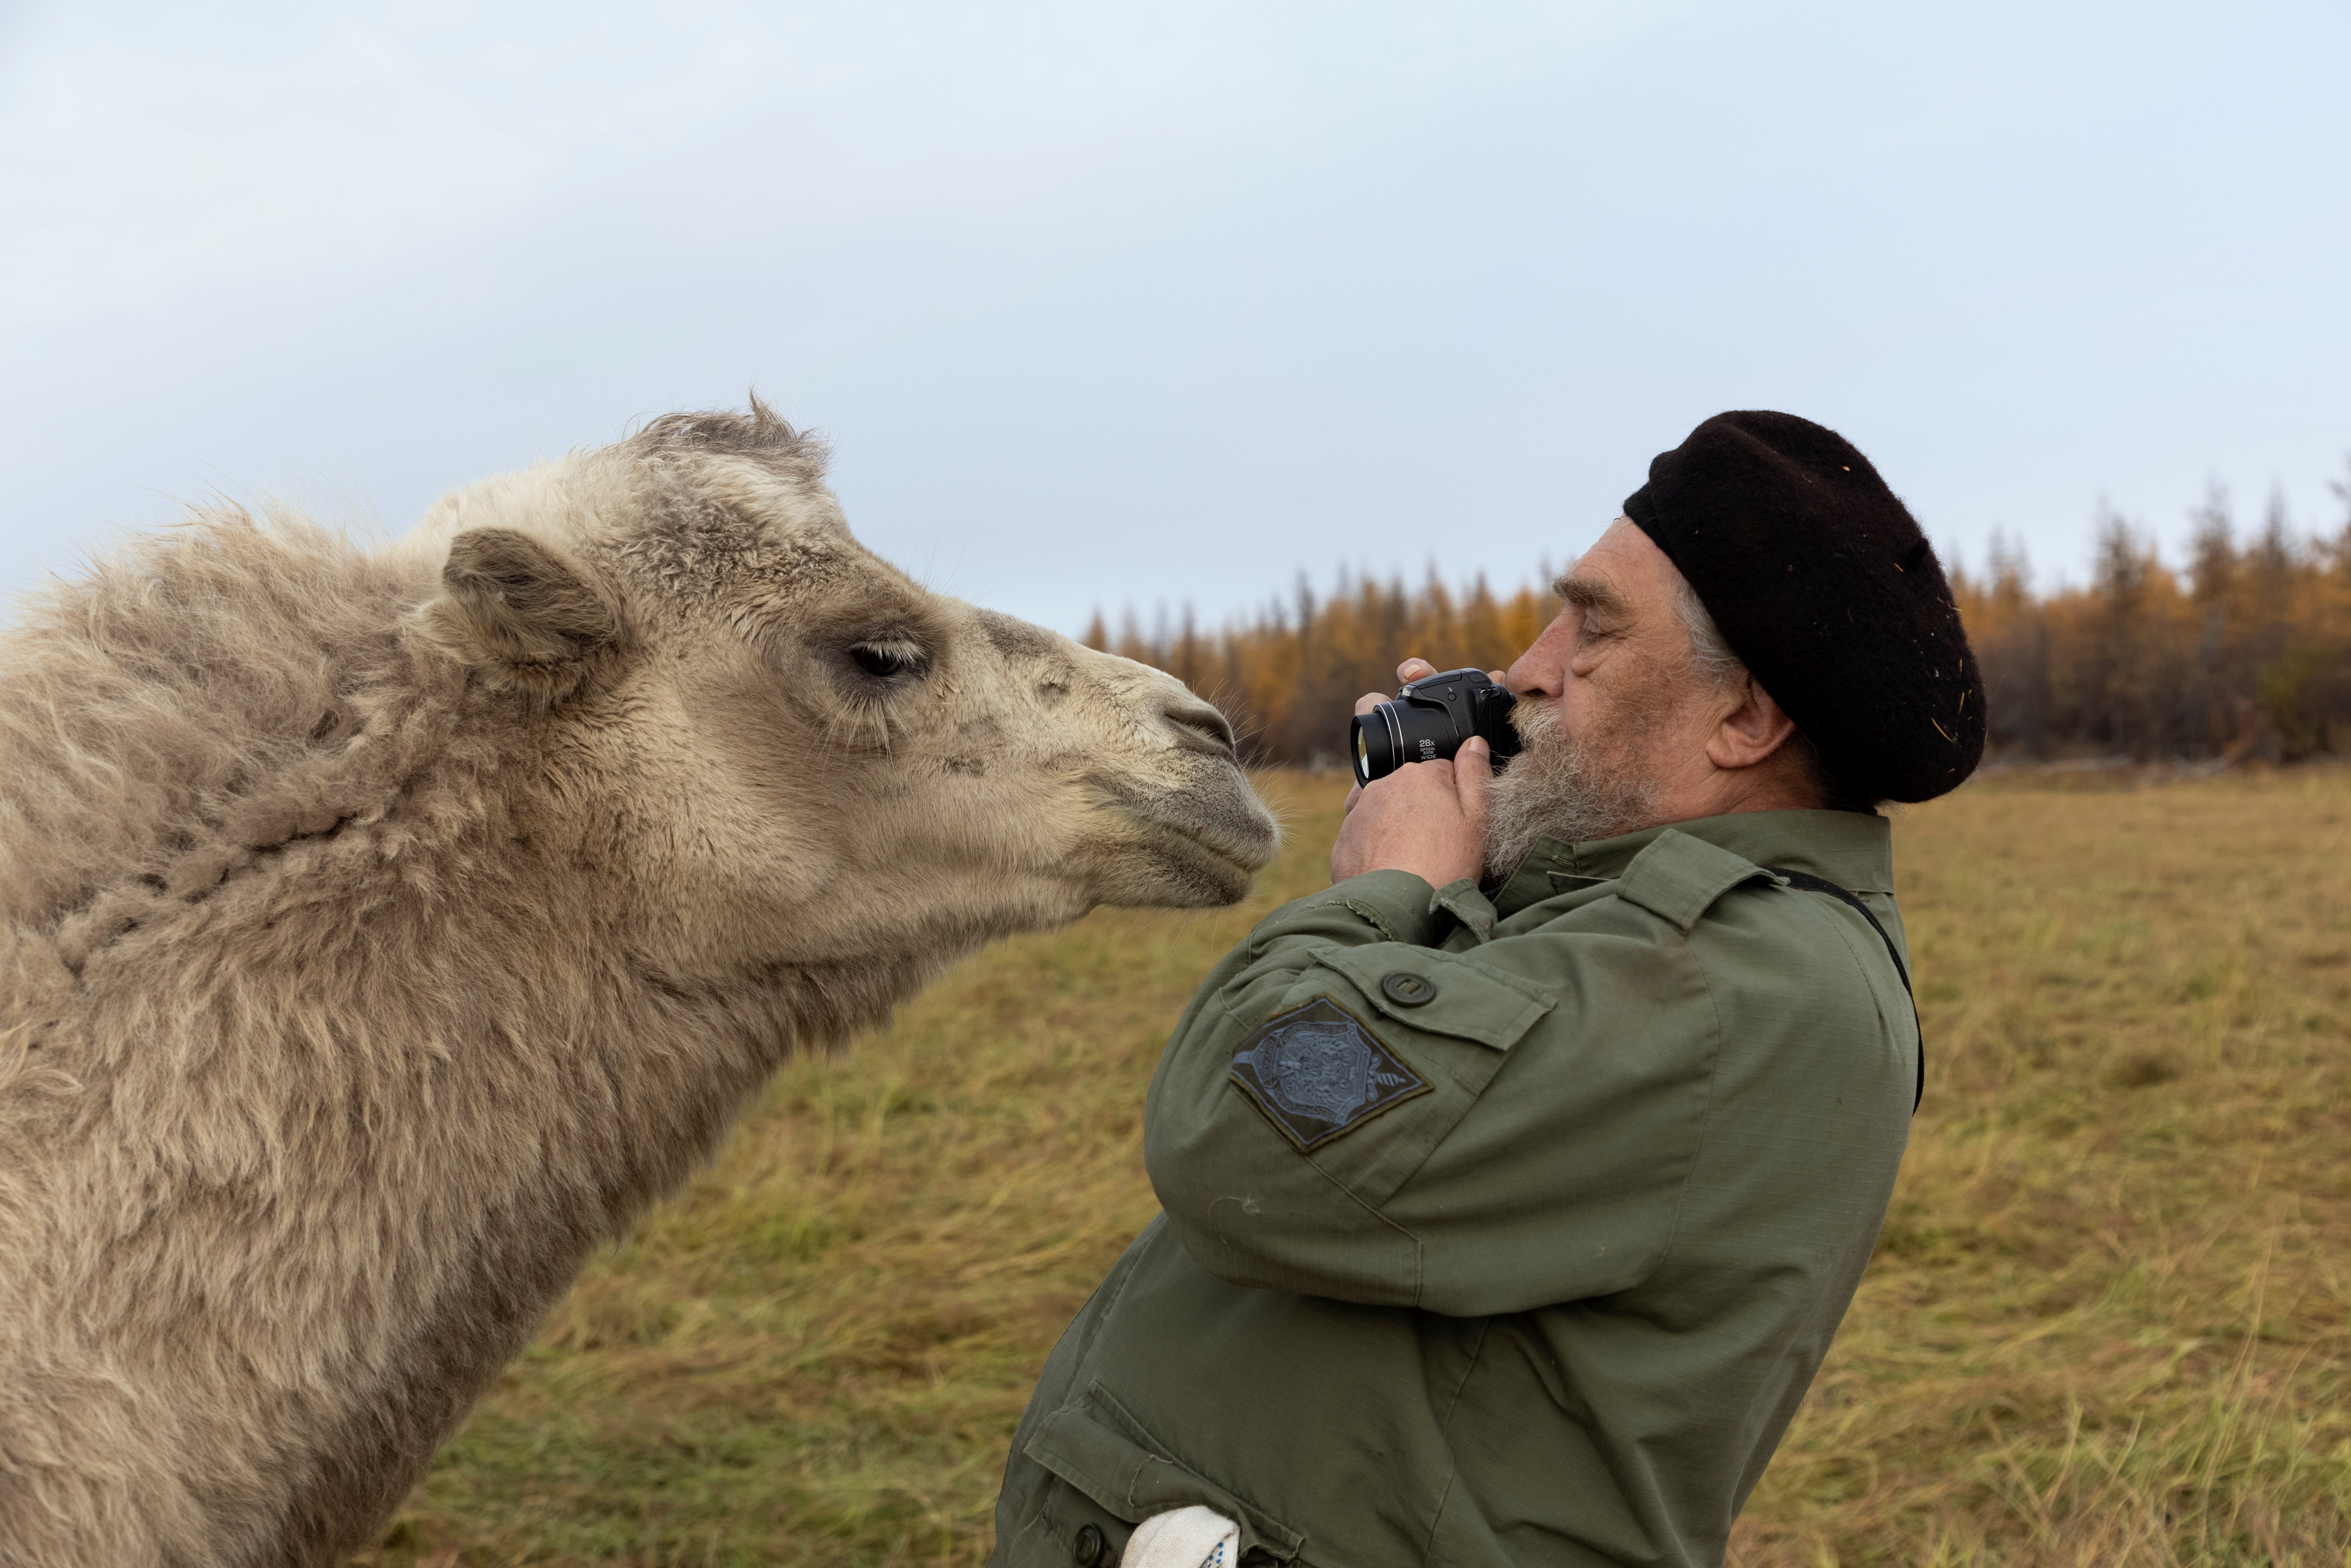 Sergey tries to take a picture of a camel